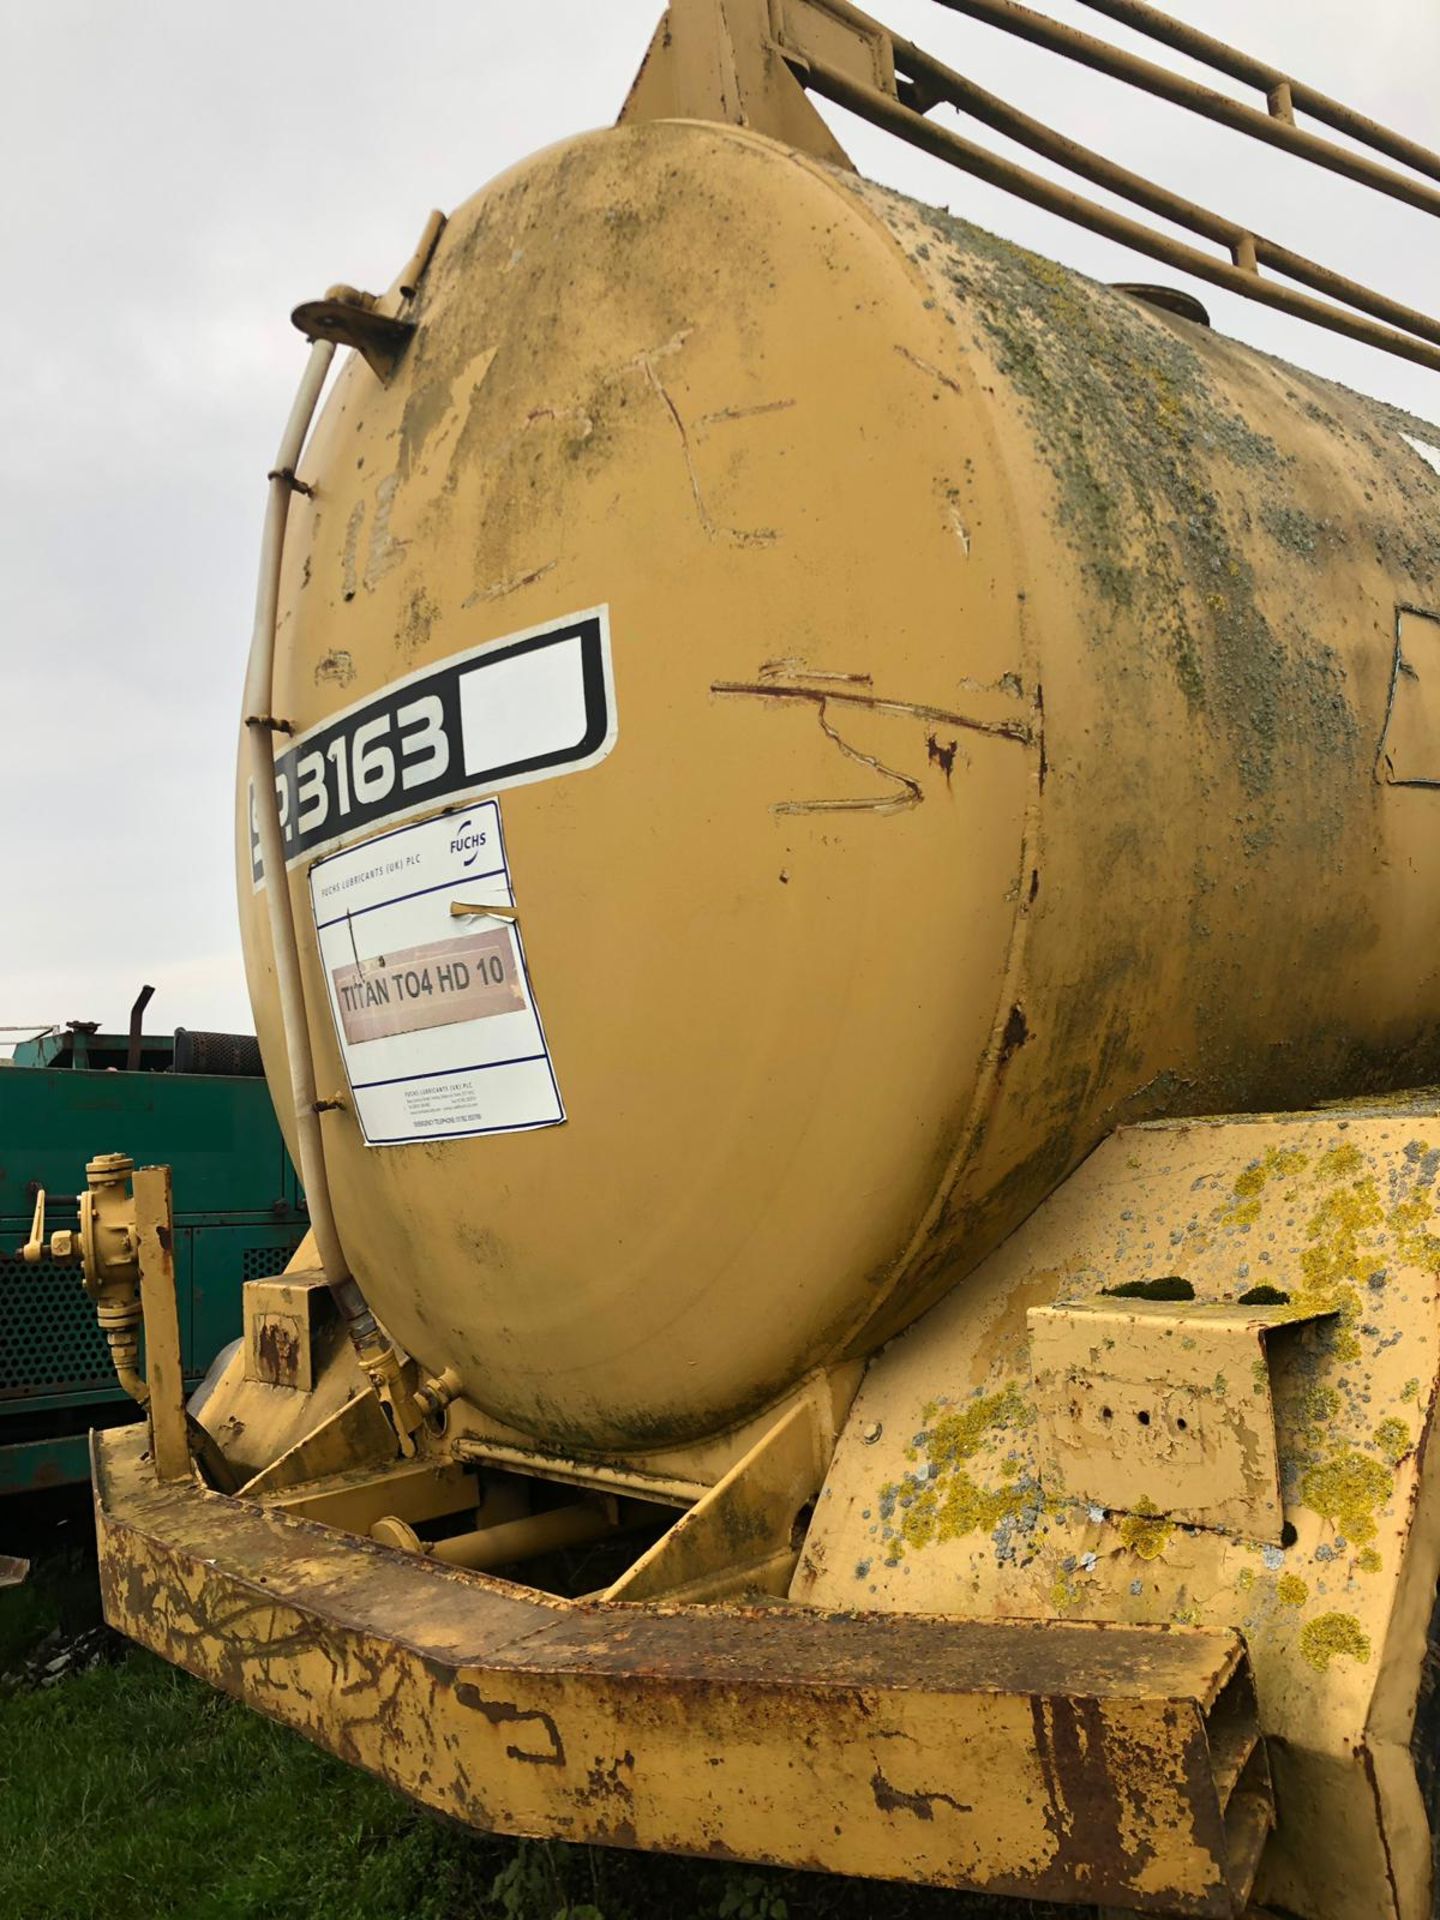 1989 TWIN AXLE TOW ABLE YELLOW OIL TANK, SERIAL NUMBER: VE 355 *PLUS VAT* - Image 7 of 10